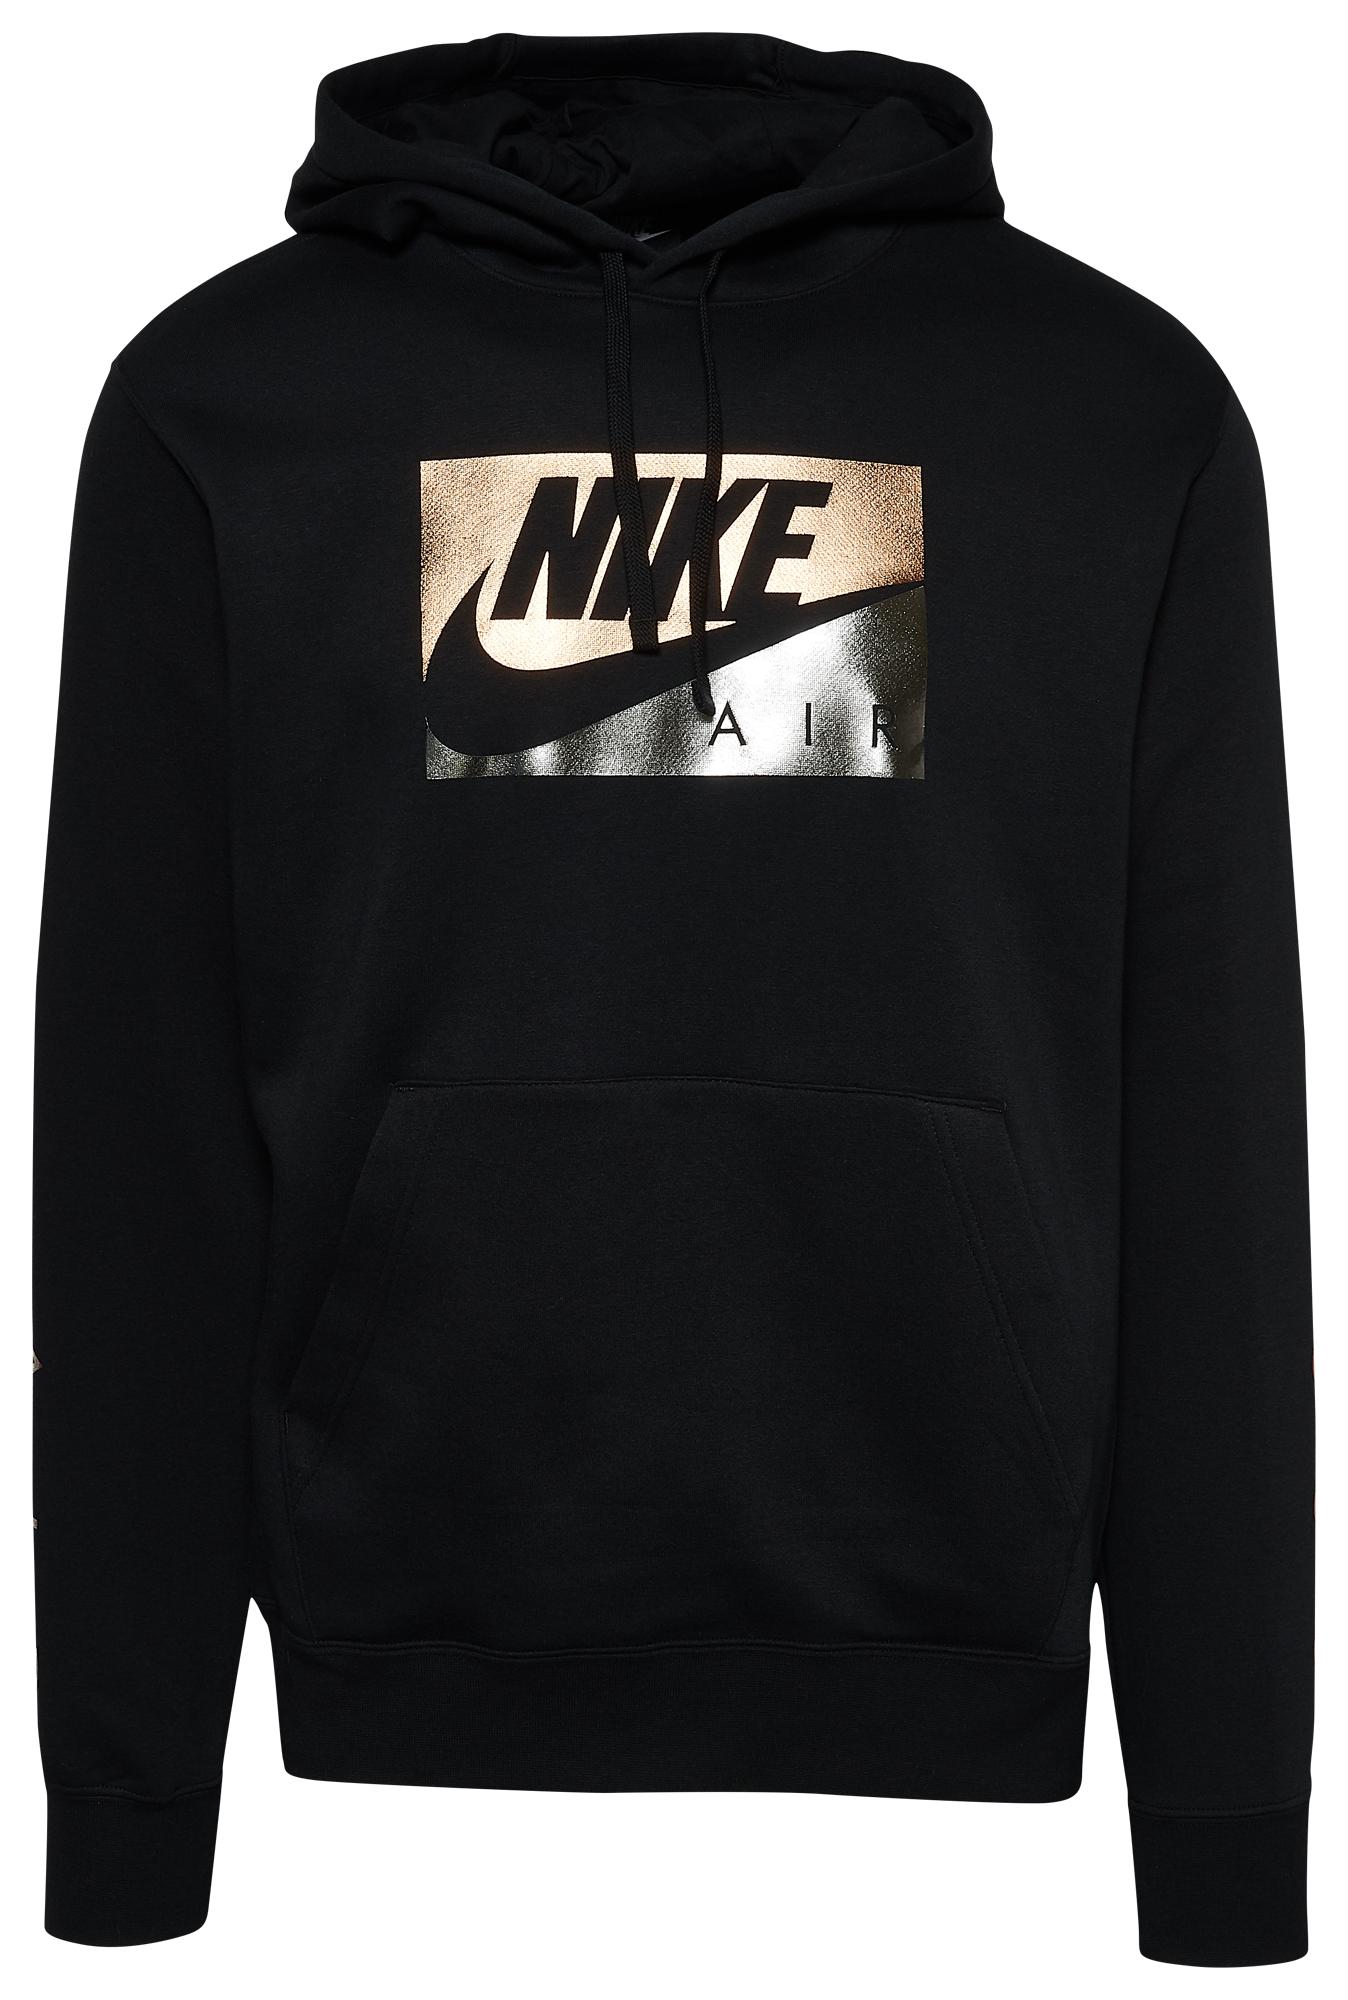 Nike Cotton Metallic Boxed Air Hoodie in Black/Copper/Silver (Black) for  Men - Lyst